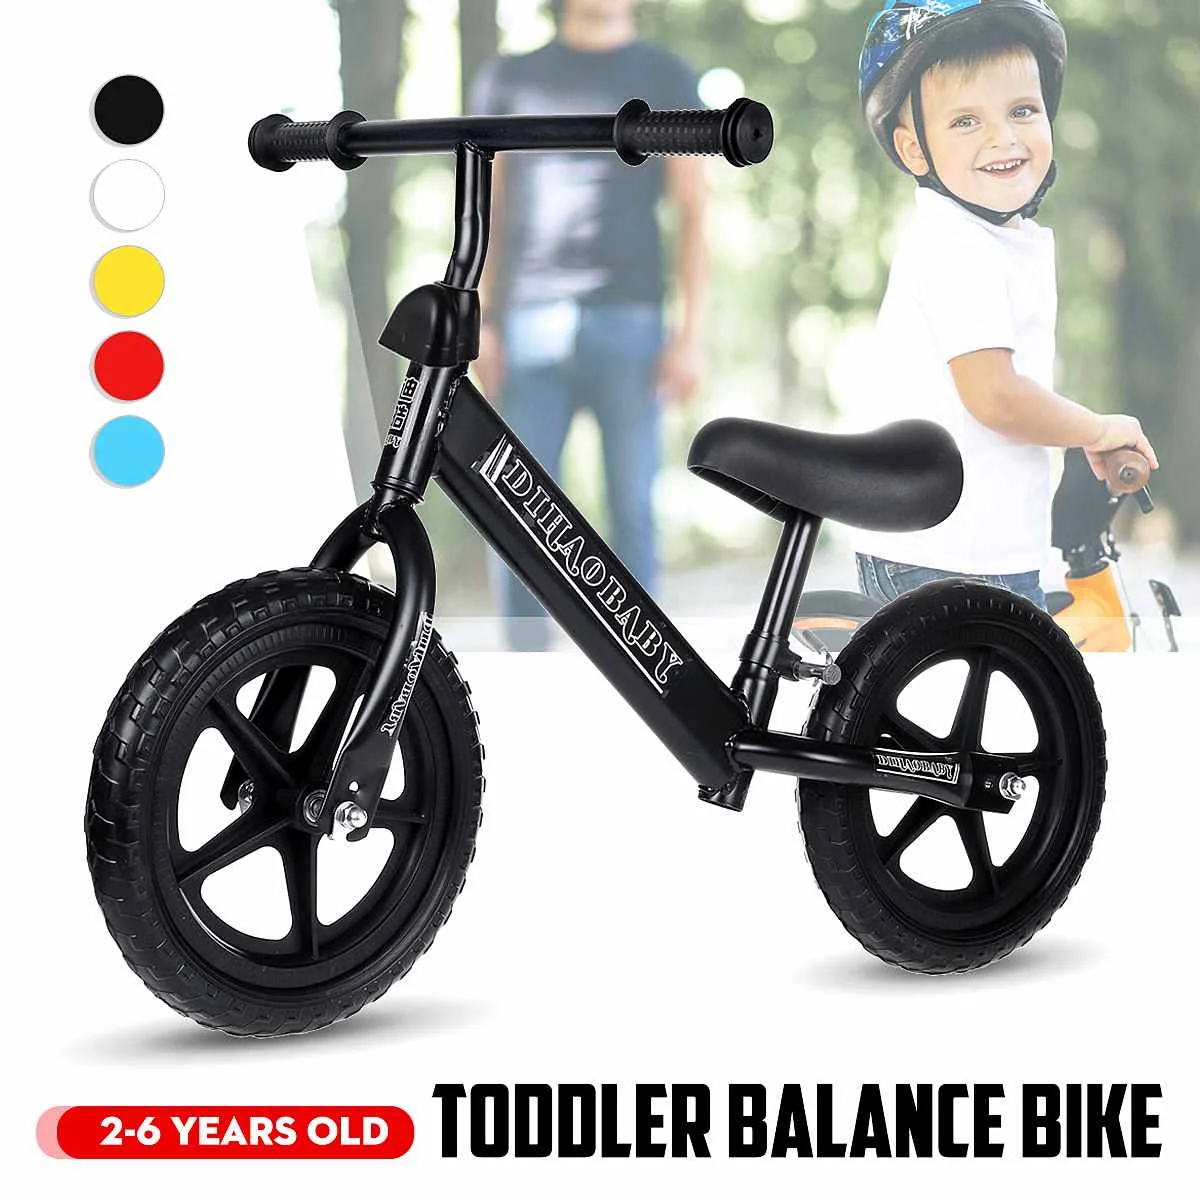 Children's Balance Bike Without Pedal Kid Two-wheeled Baby Slide Toddler Bike Outdoor Sports Ride on Car Riding Toys for 2-6Year